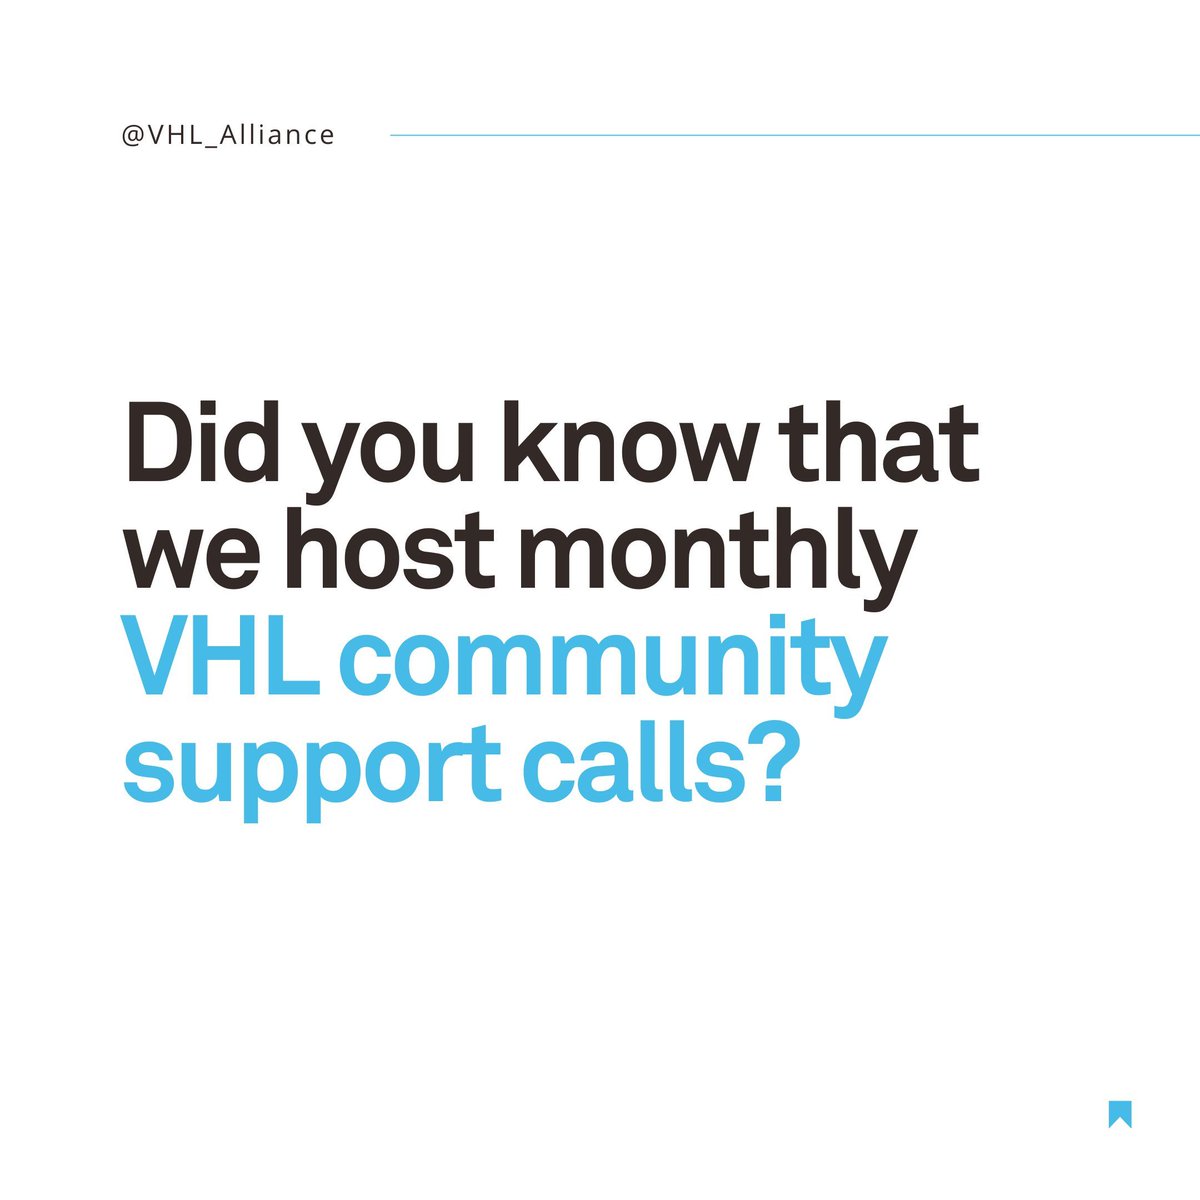 Have you registered for our upcoming VHL community support calls? Feb 5th: VHL Patient / Caregiver Call Feb 21st: Low / No Vision Call Register here ➡️ buff.ly/3R9XgkX